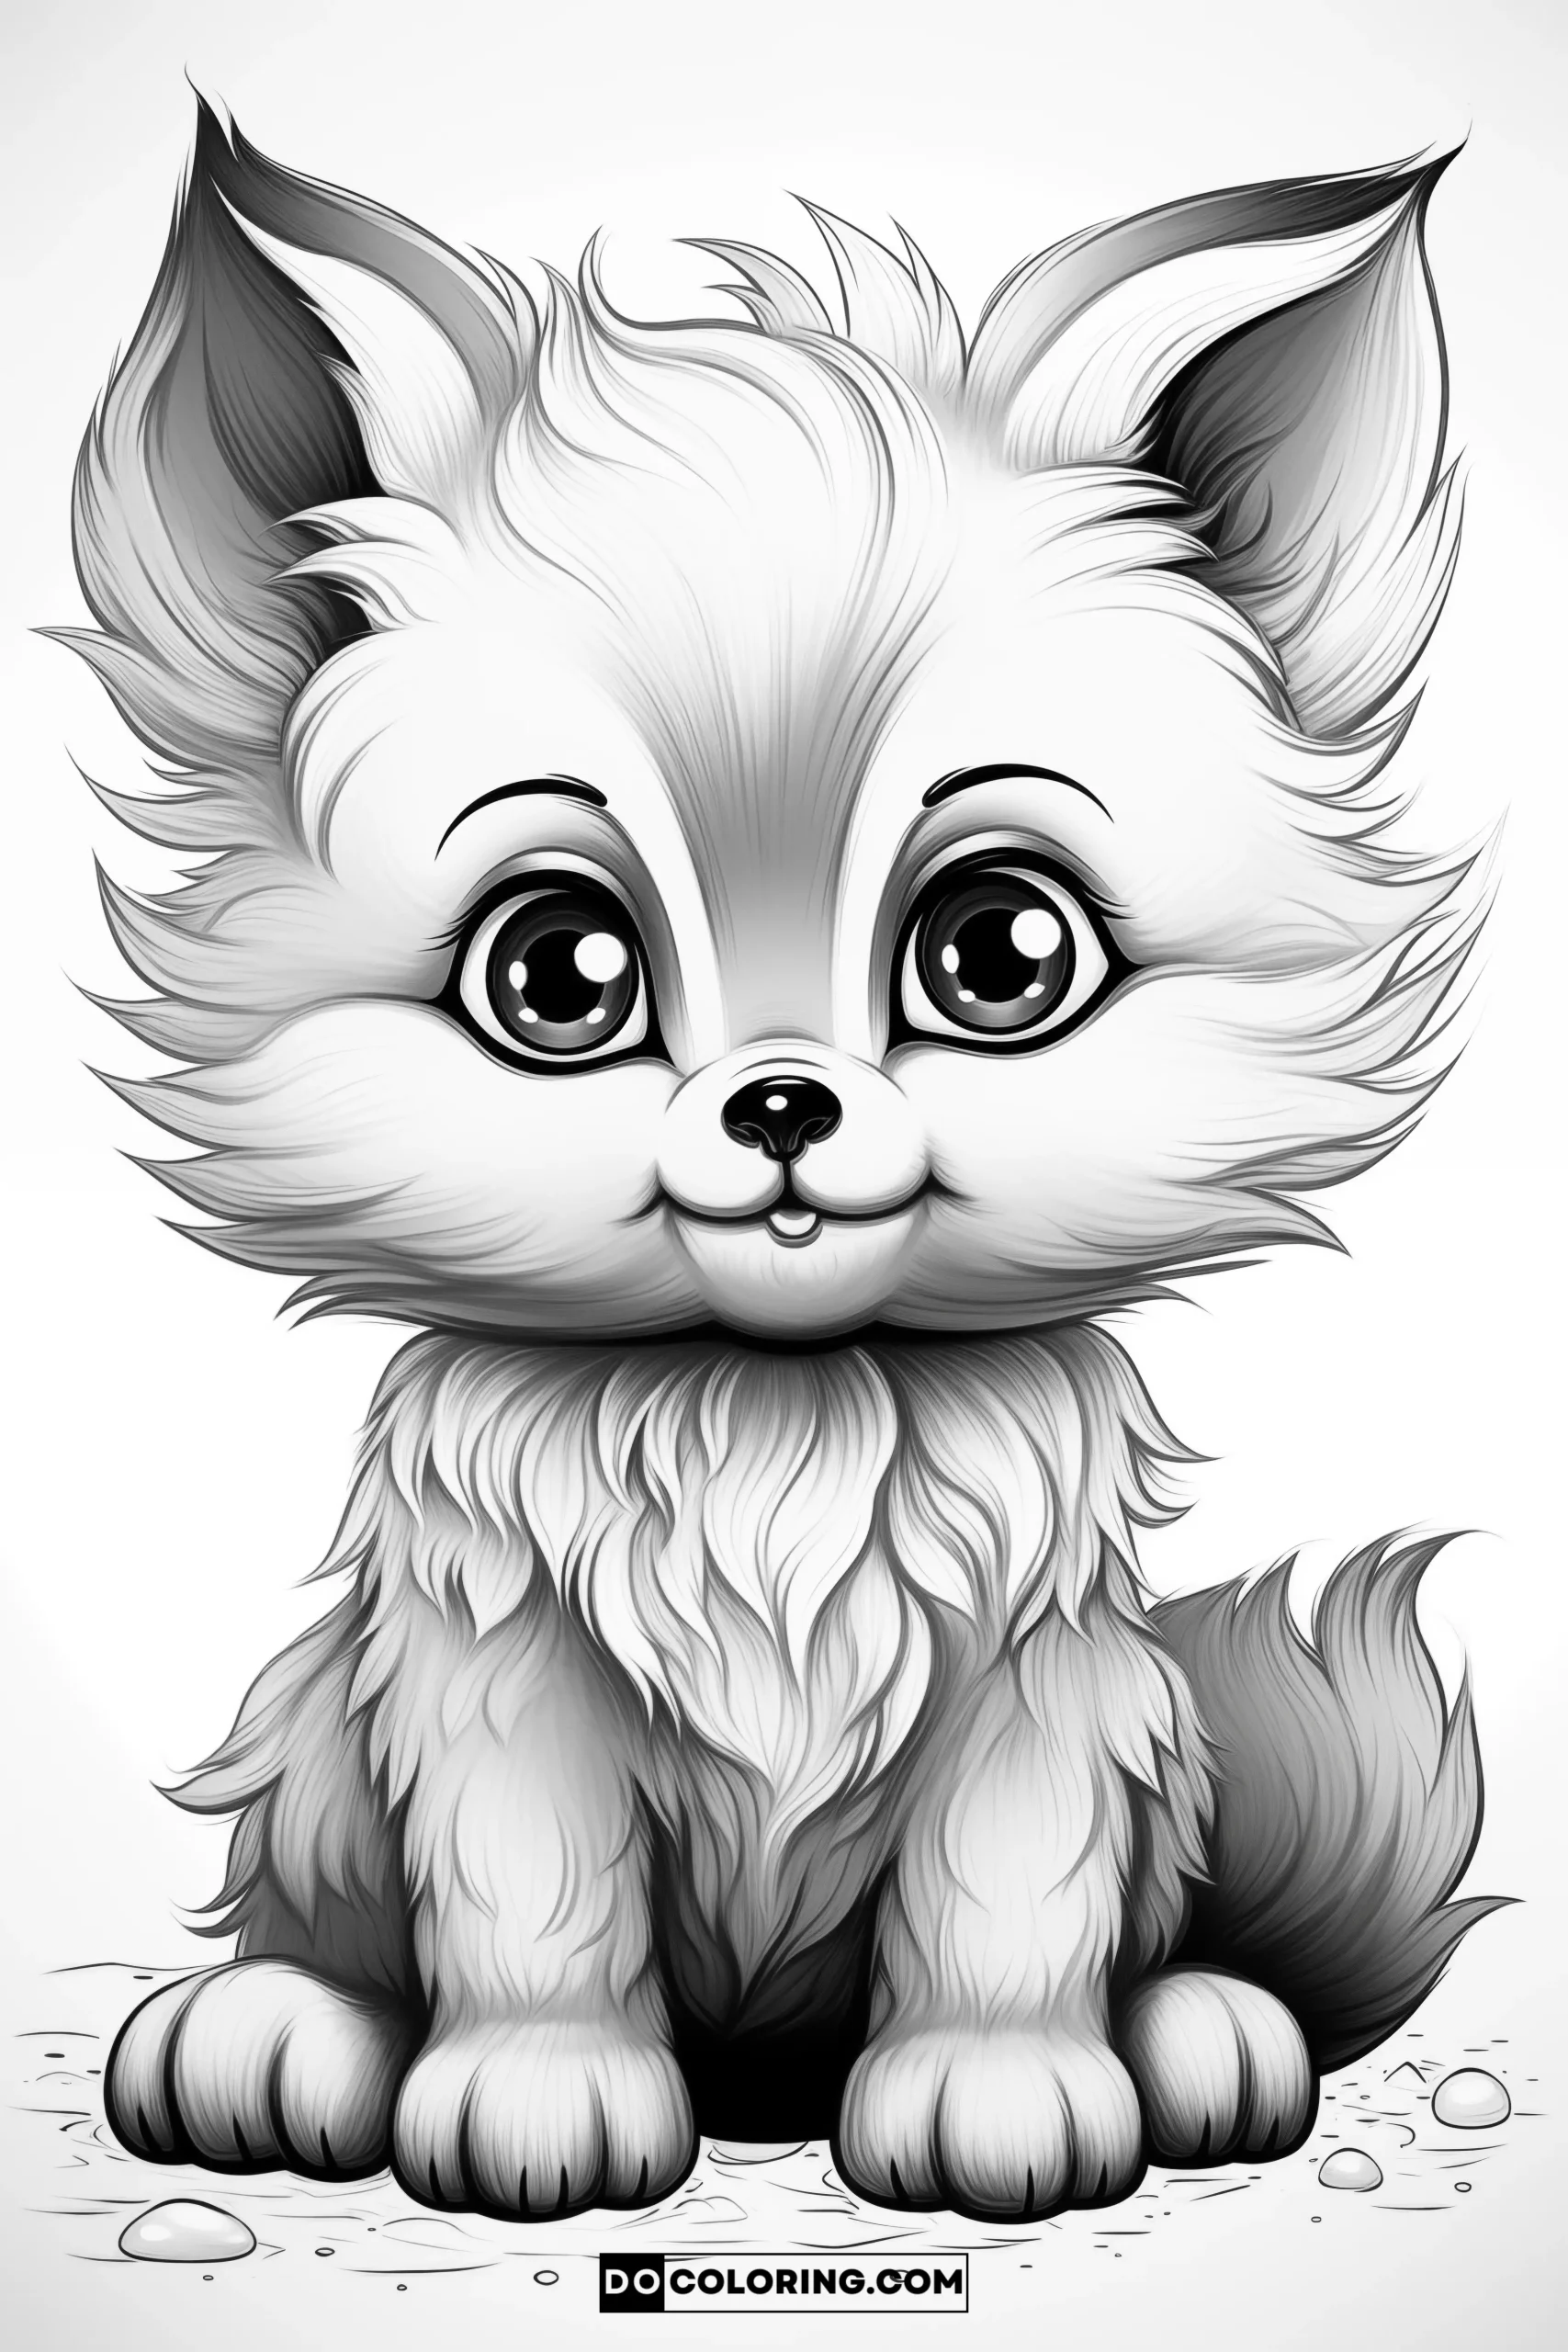 A charming depiction of a fluffy baby fox, offering a delightful coloring experience for adults.